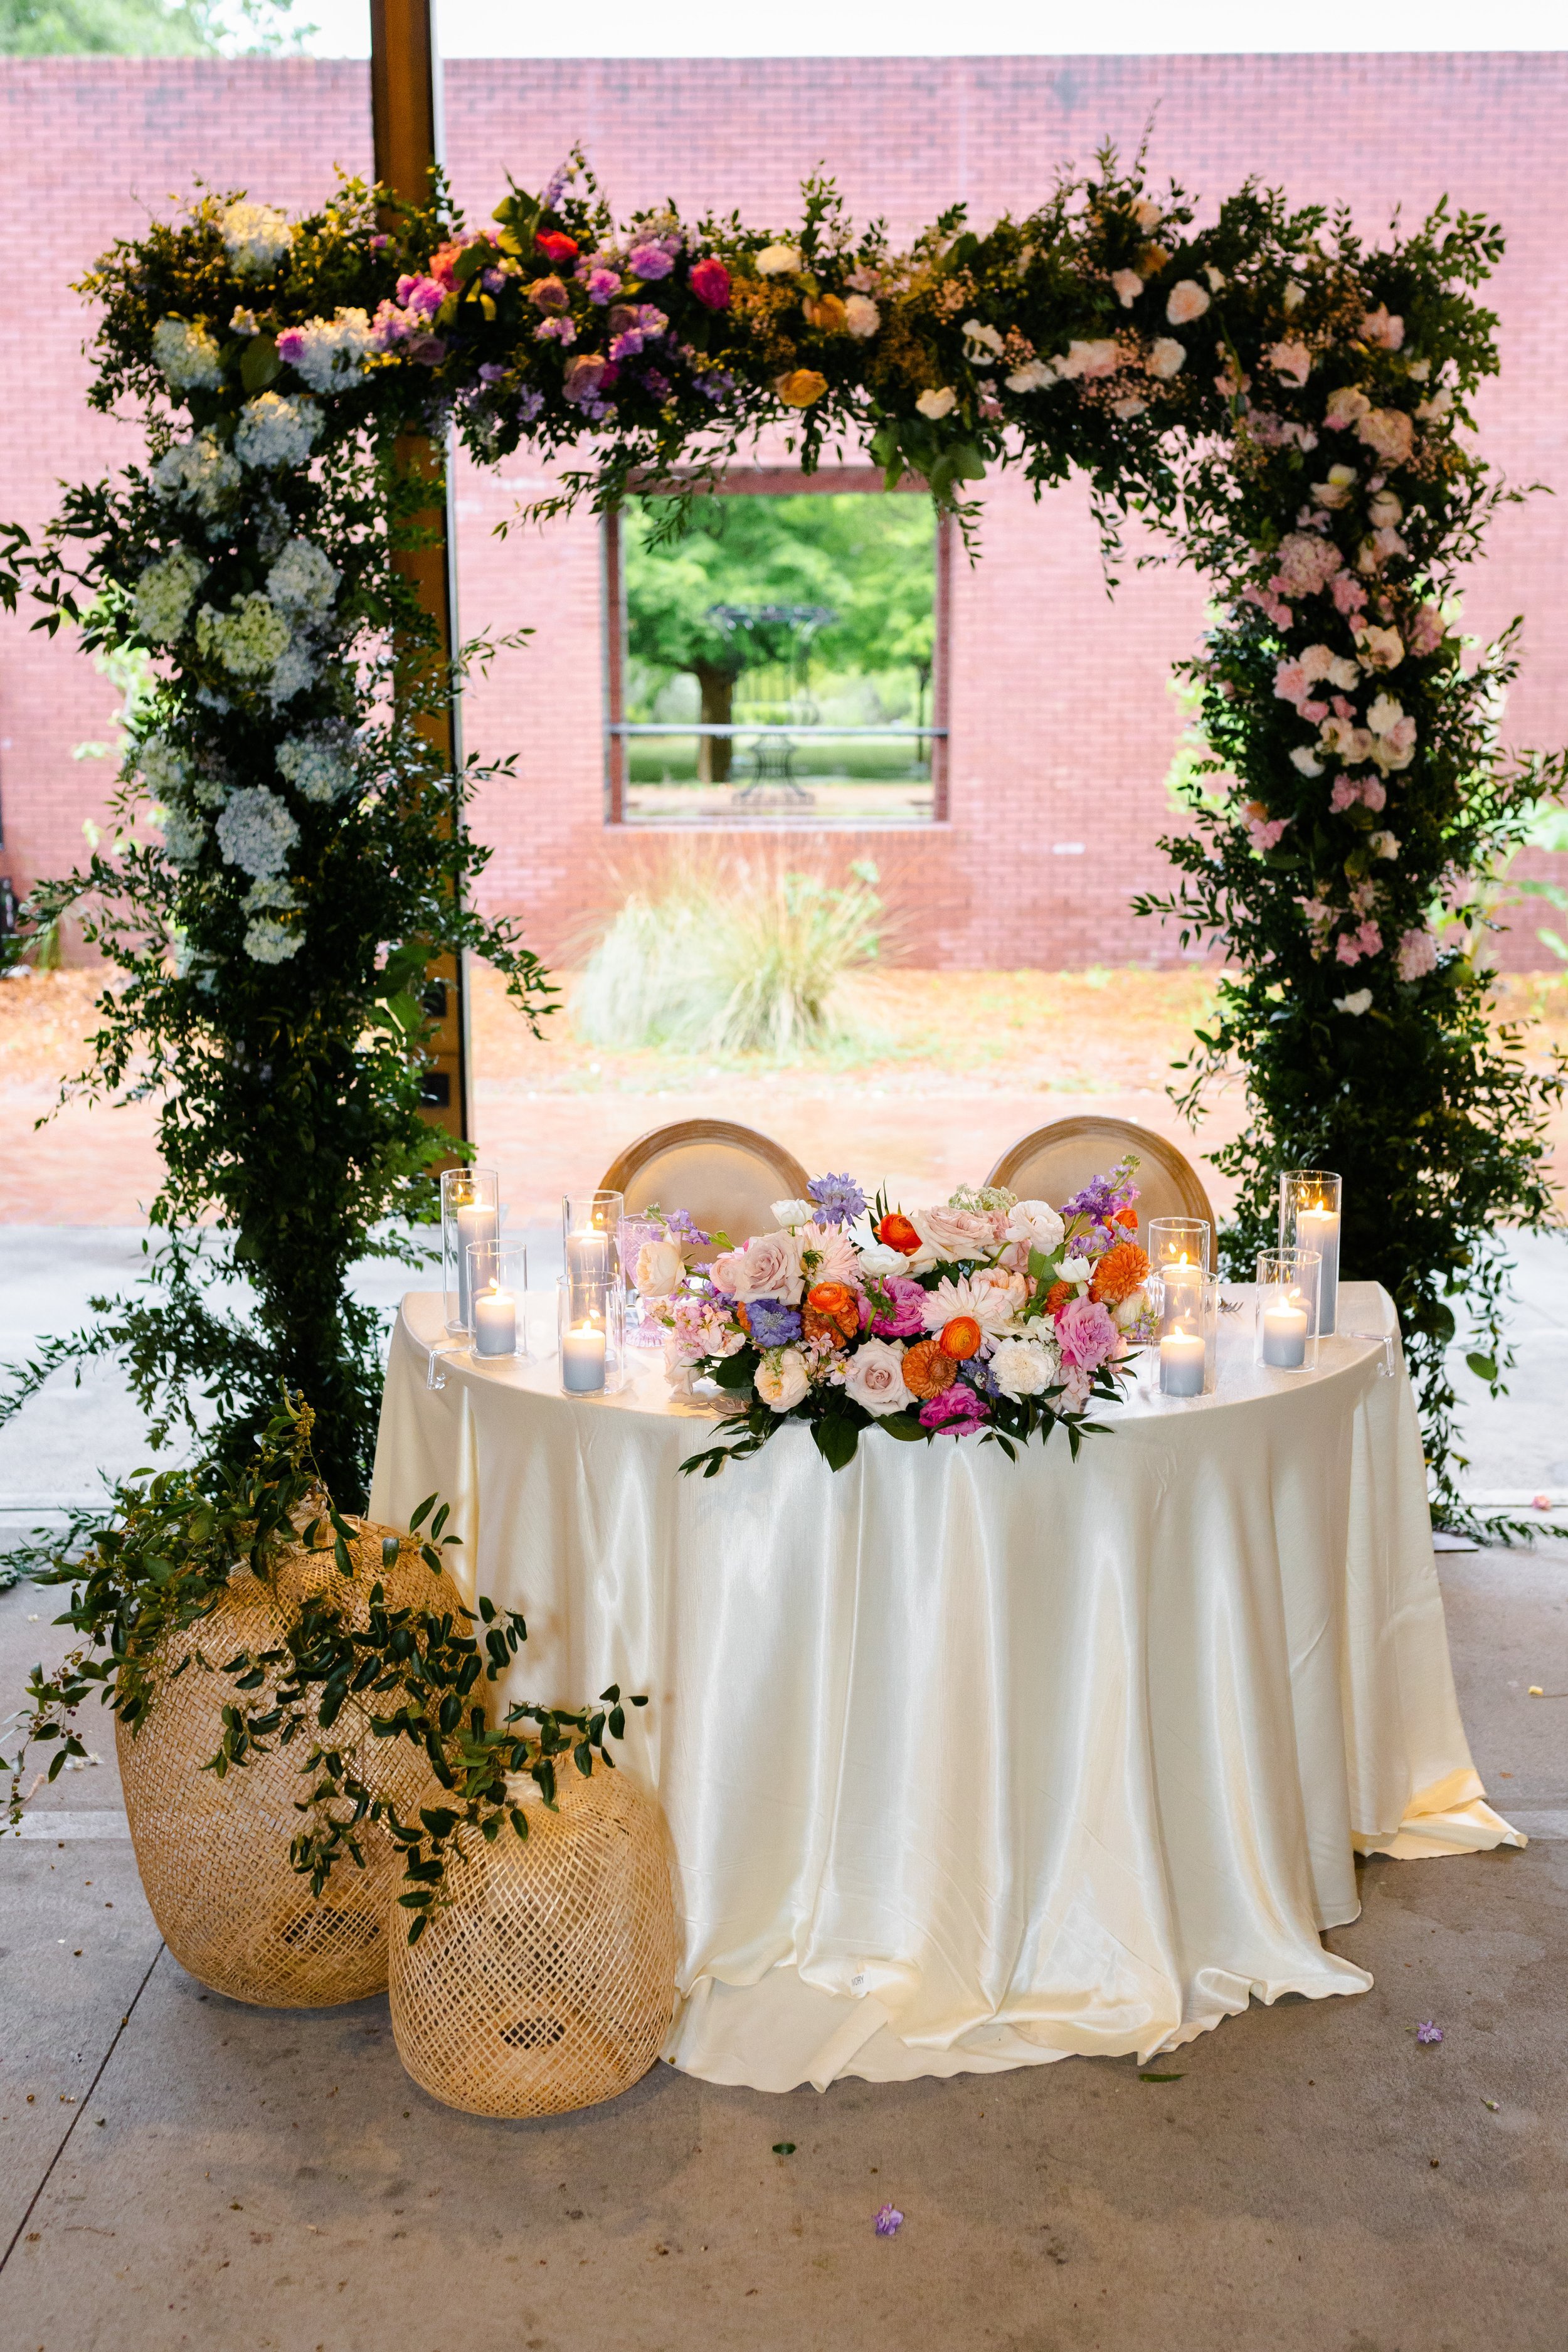 sam-and-coys-bright-and-colorful-garden-wedding-at-ships-of-the-sea-in-savannah-georgia-with-colorful-wedding-florals-desinged-by-savannah-florist-ivory-and-beau-savannah-wedding-savannah-wedding-flowers-savannah-florist-26.jpg